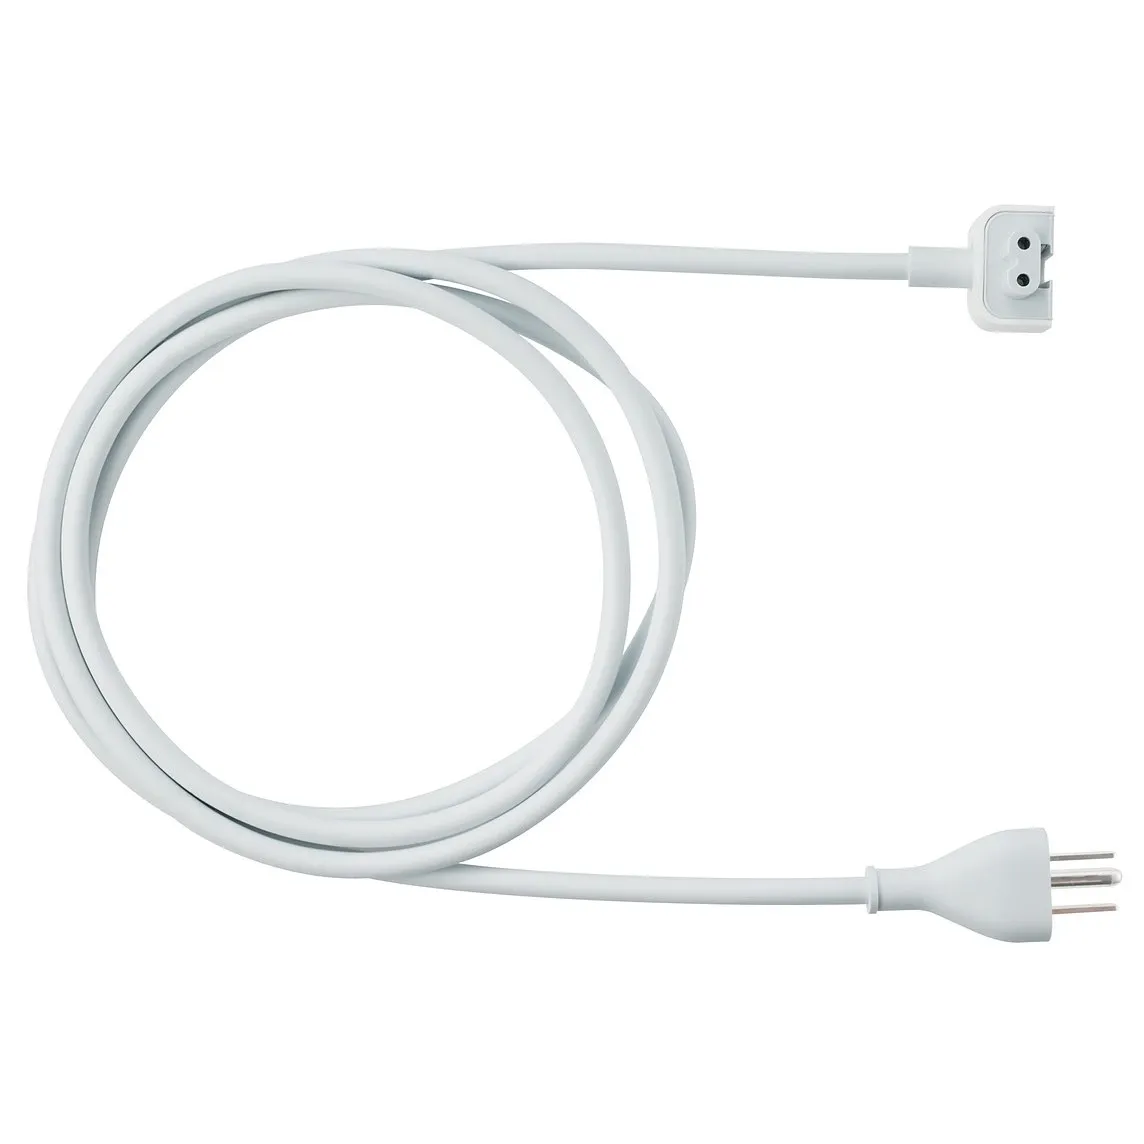 Mac Apple Power Adapter Extension Wall Cord Cable photo 1